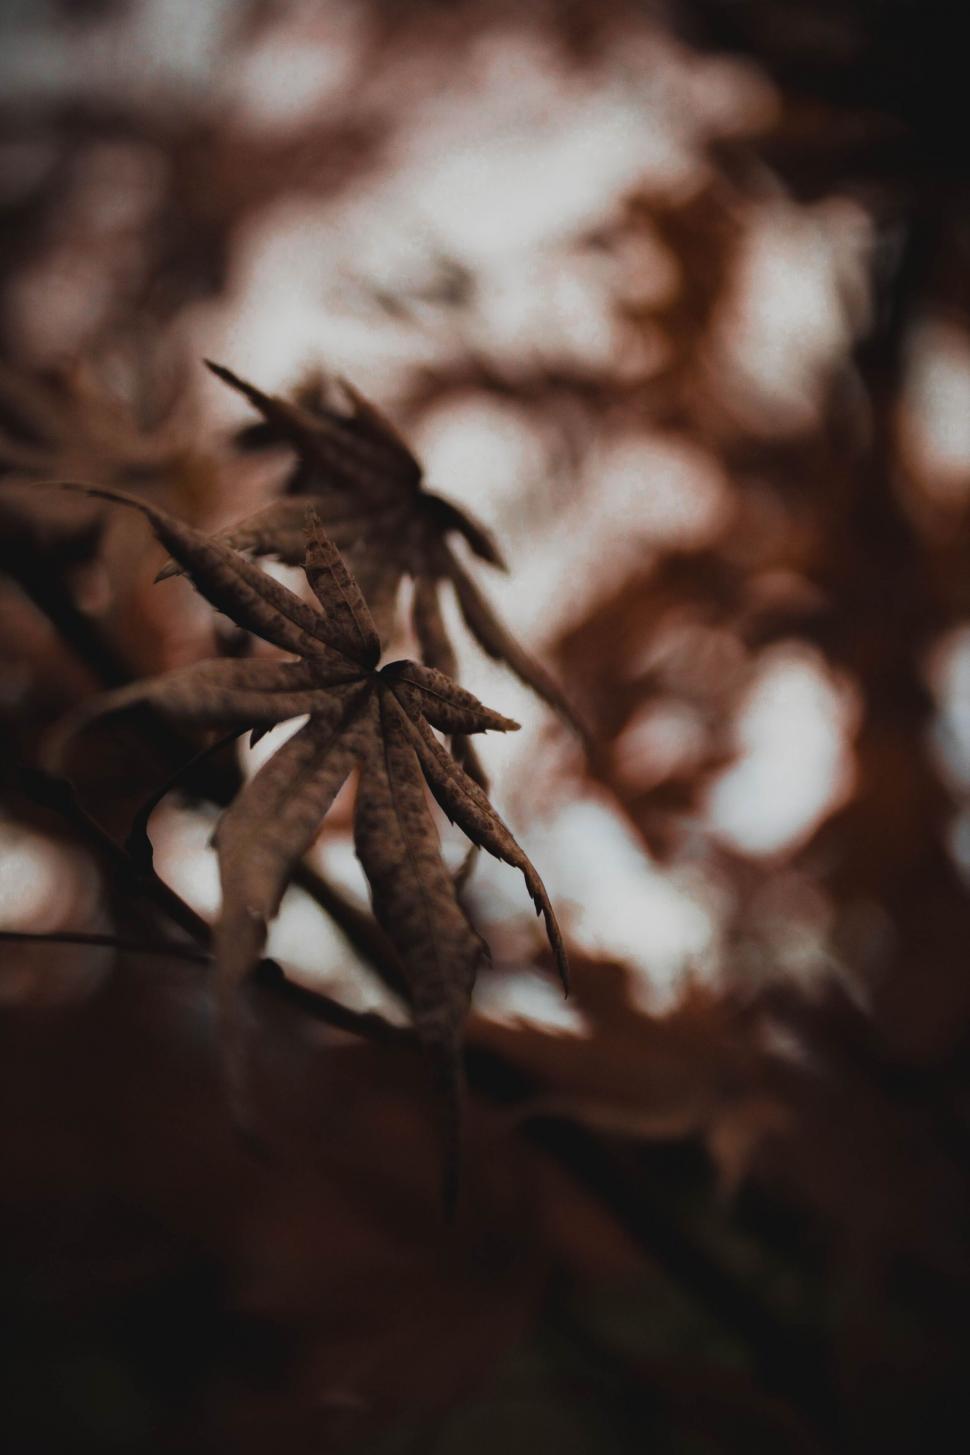 Free Image of Withered leaves in autumnal forest setting 